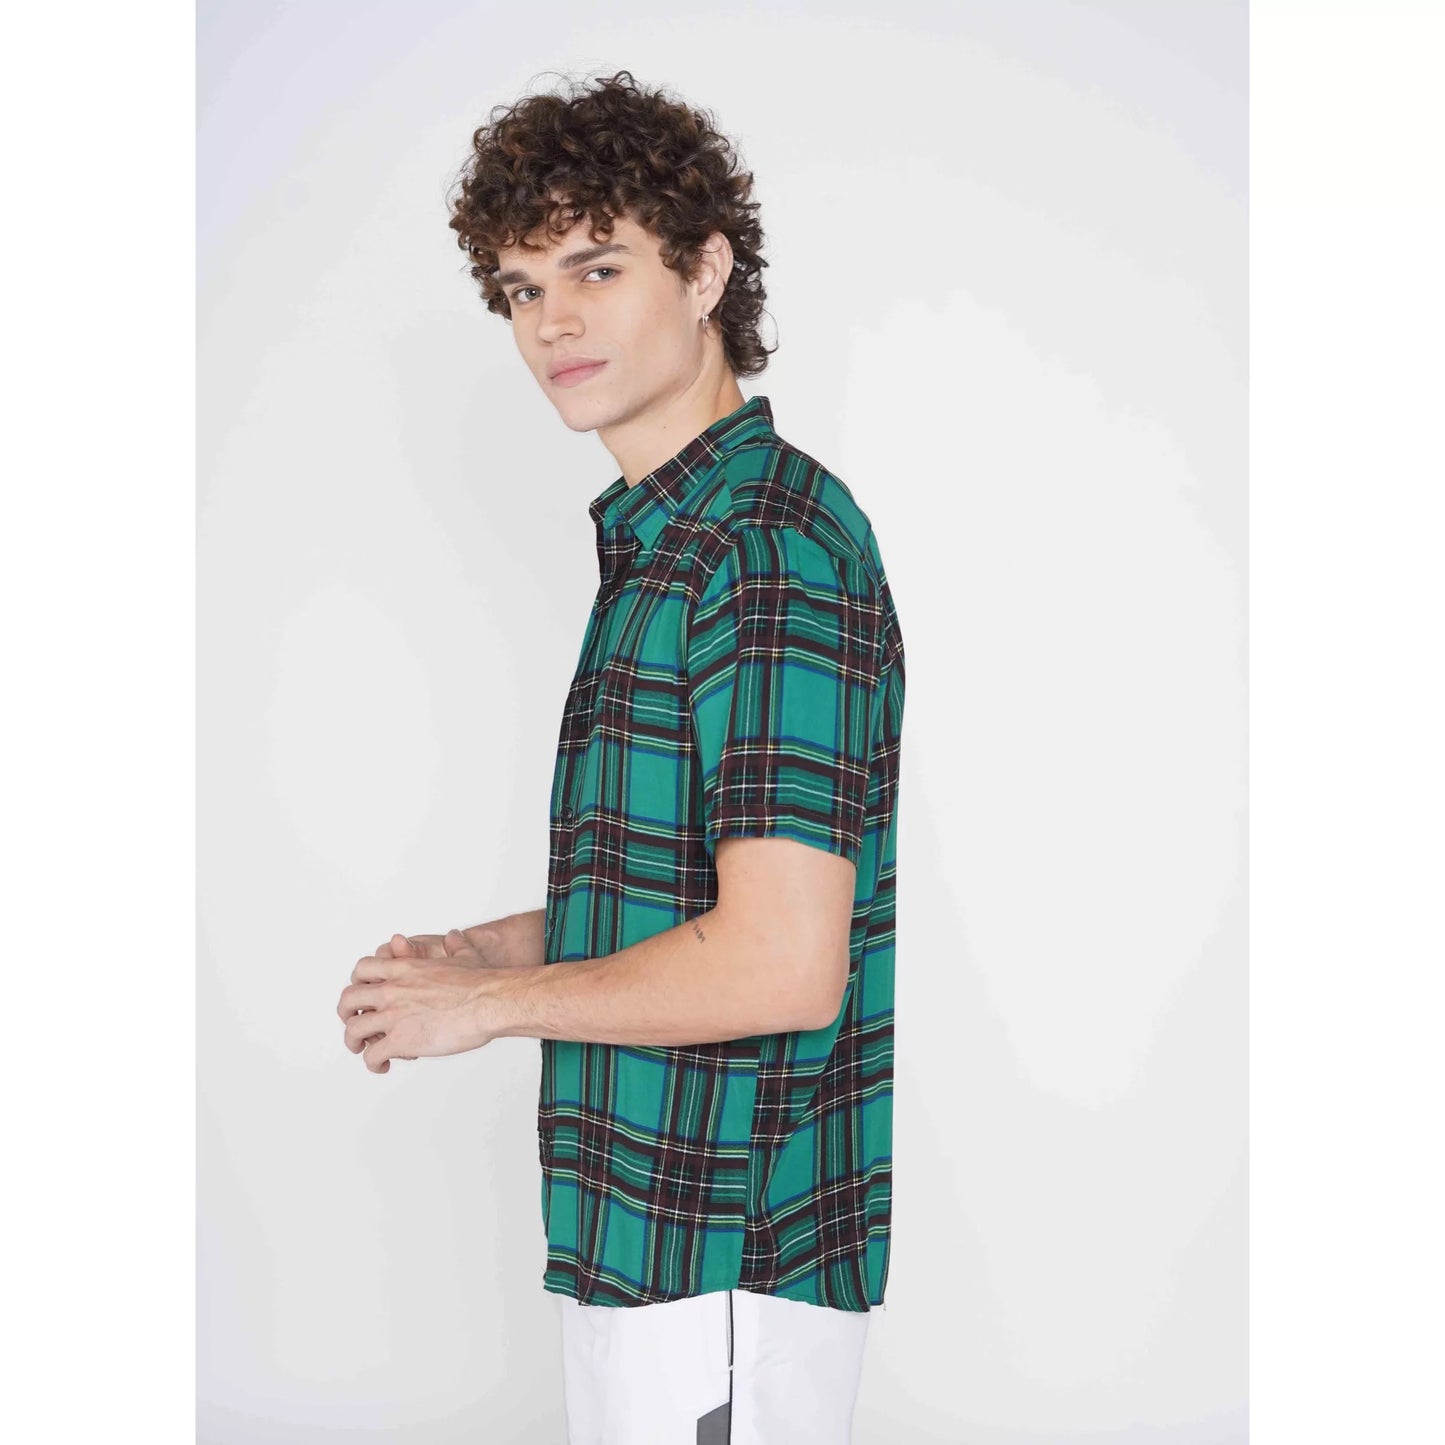 Movers and checkers - Green and black check shirt